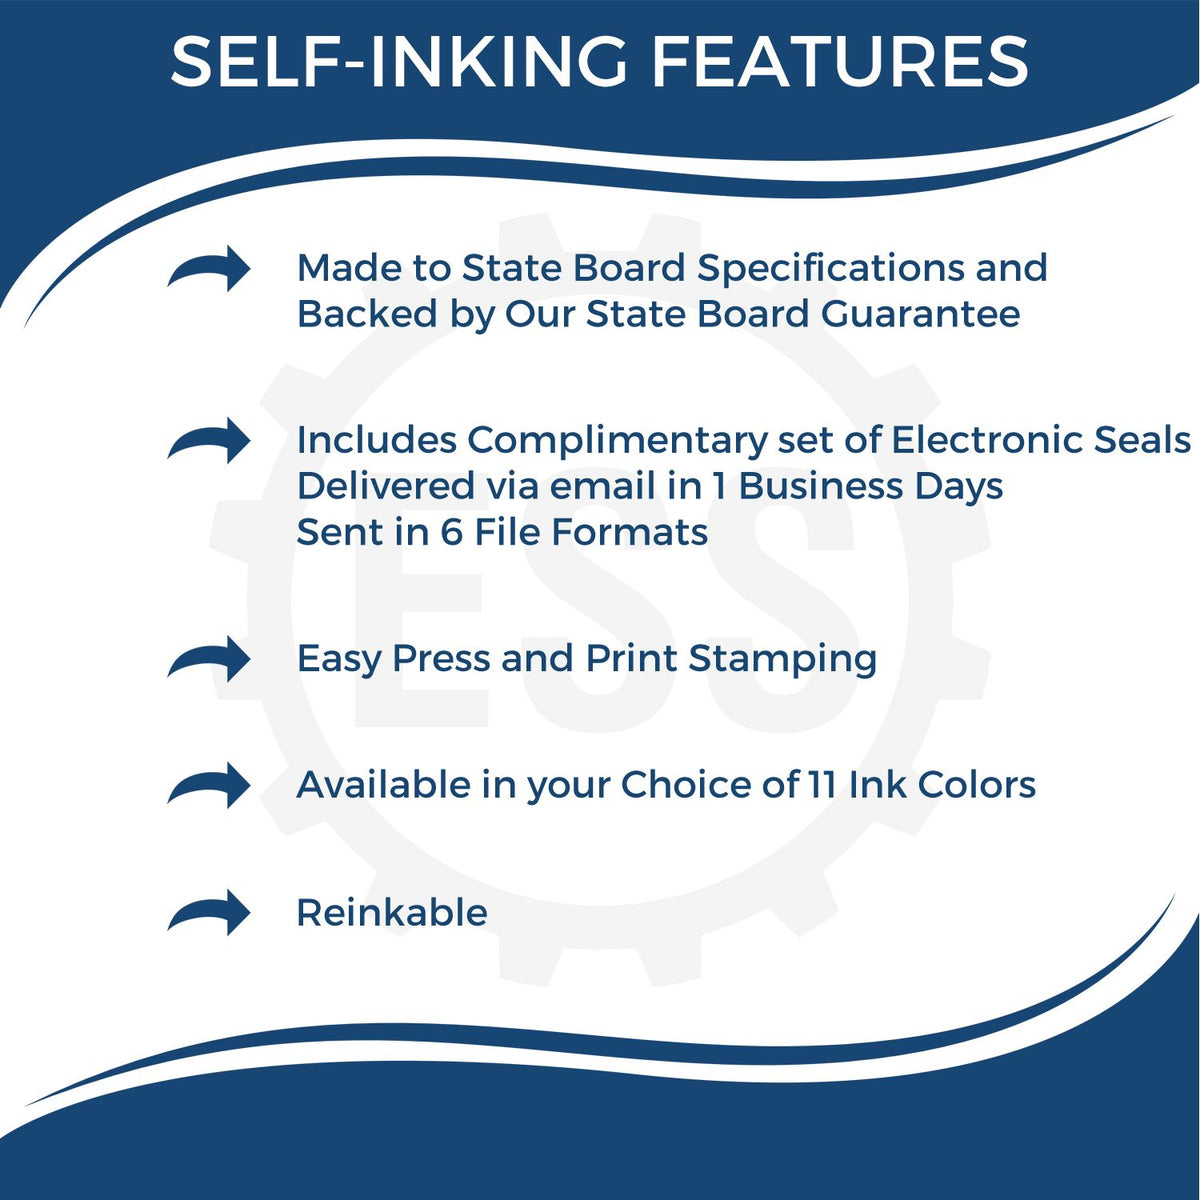 A picture of an infographic highlighting the selling points for the Self-Inking Tennessee Landscape Architect Stamp